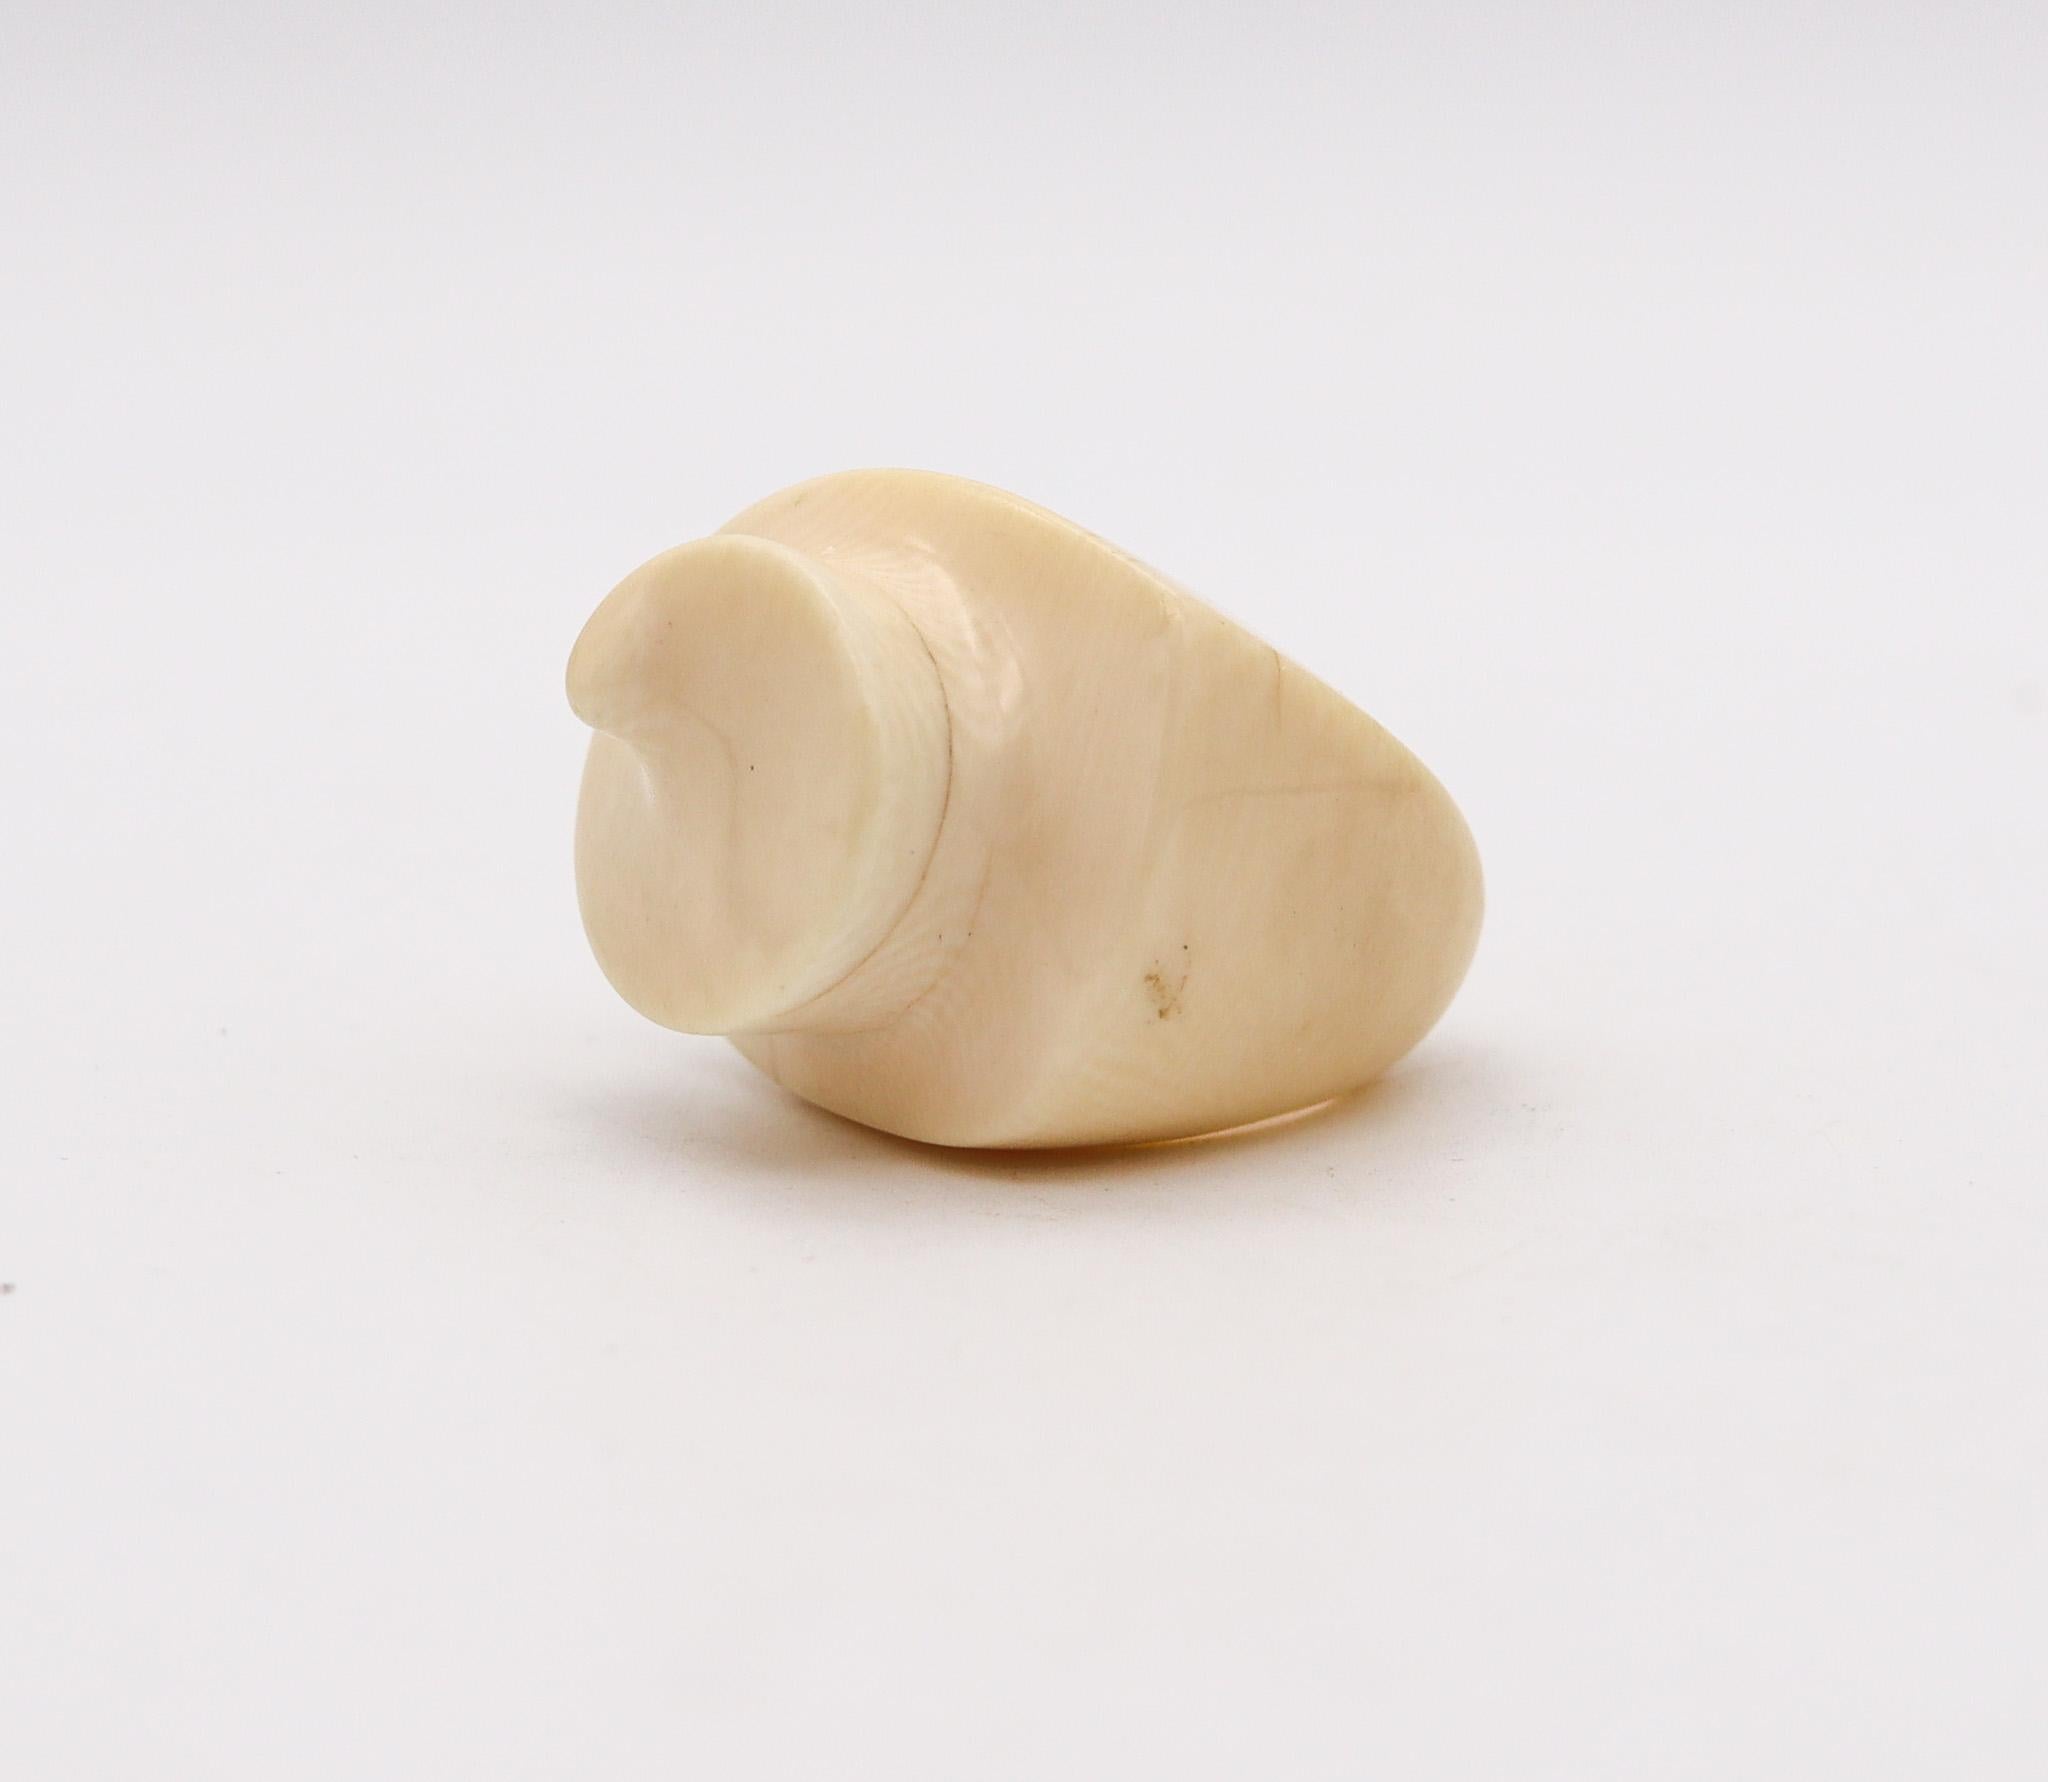 Modernist sculptural carved ring designed by Patricia Von Musulin.

Beautiful cocktail ring, created by Patricia Von Musulin during the modernist period, back in the 1970. Carefully carved in three dimensions, with an abstract sculptural swirl